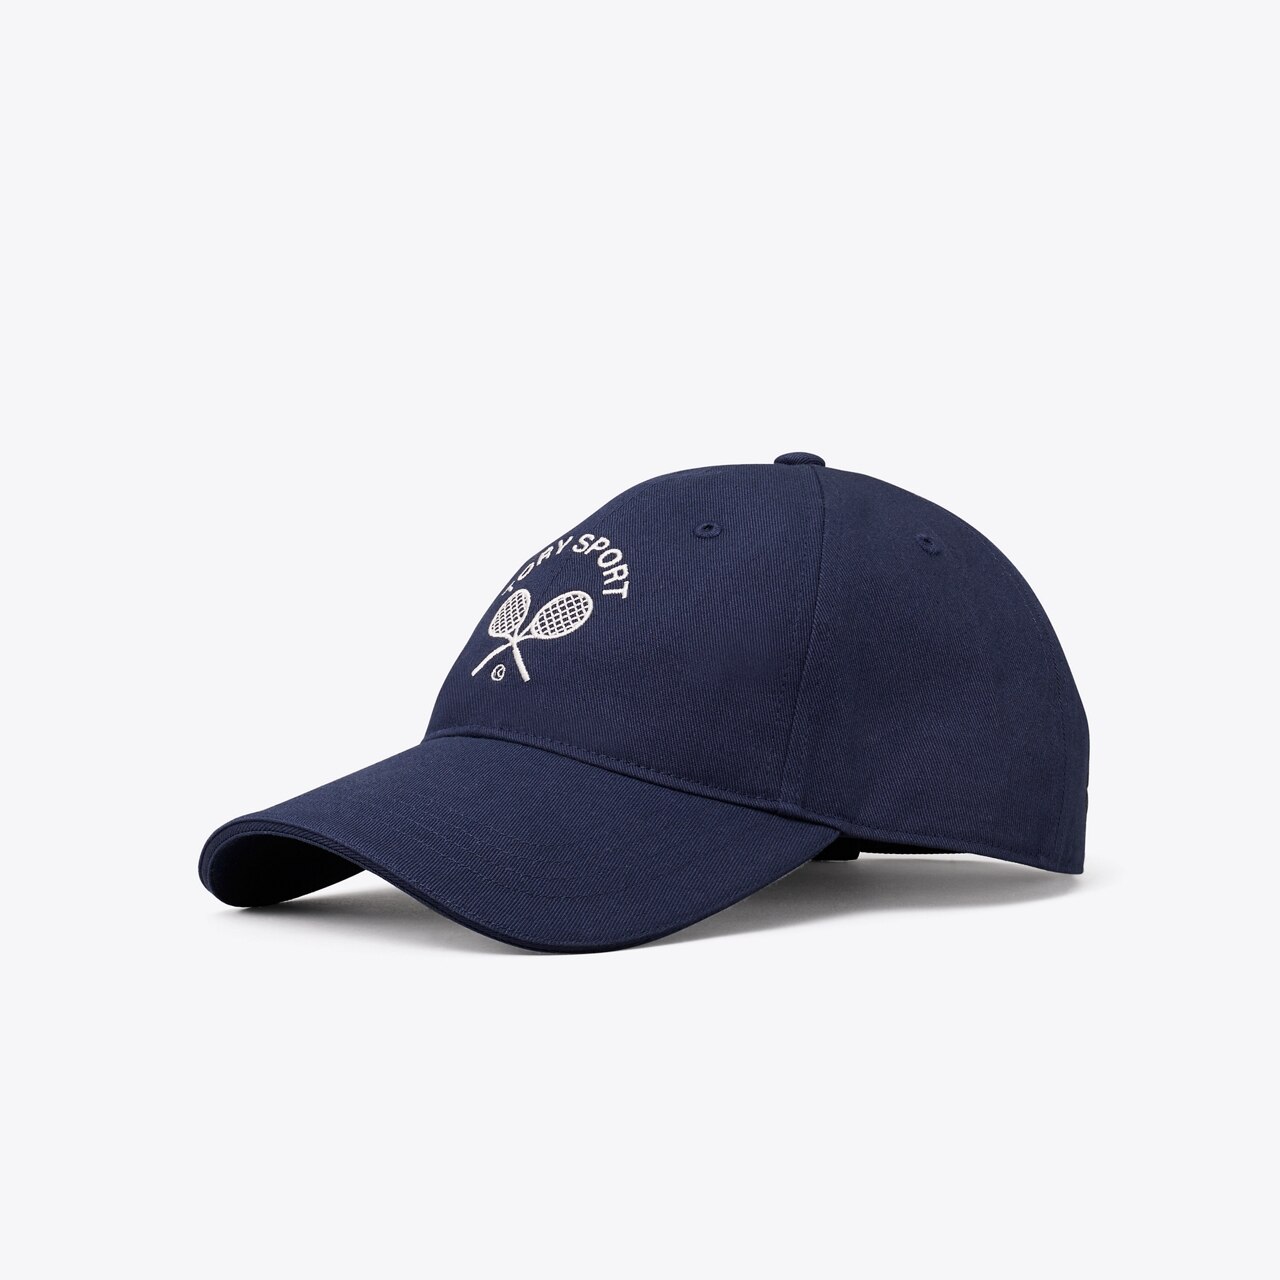 Embroidered Racquets Cap